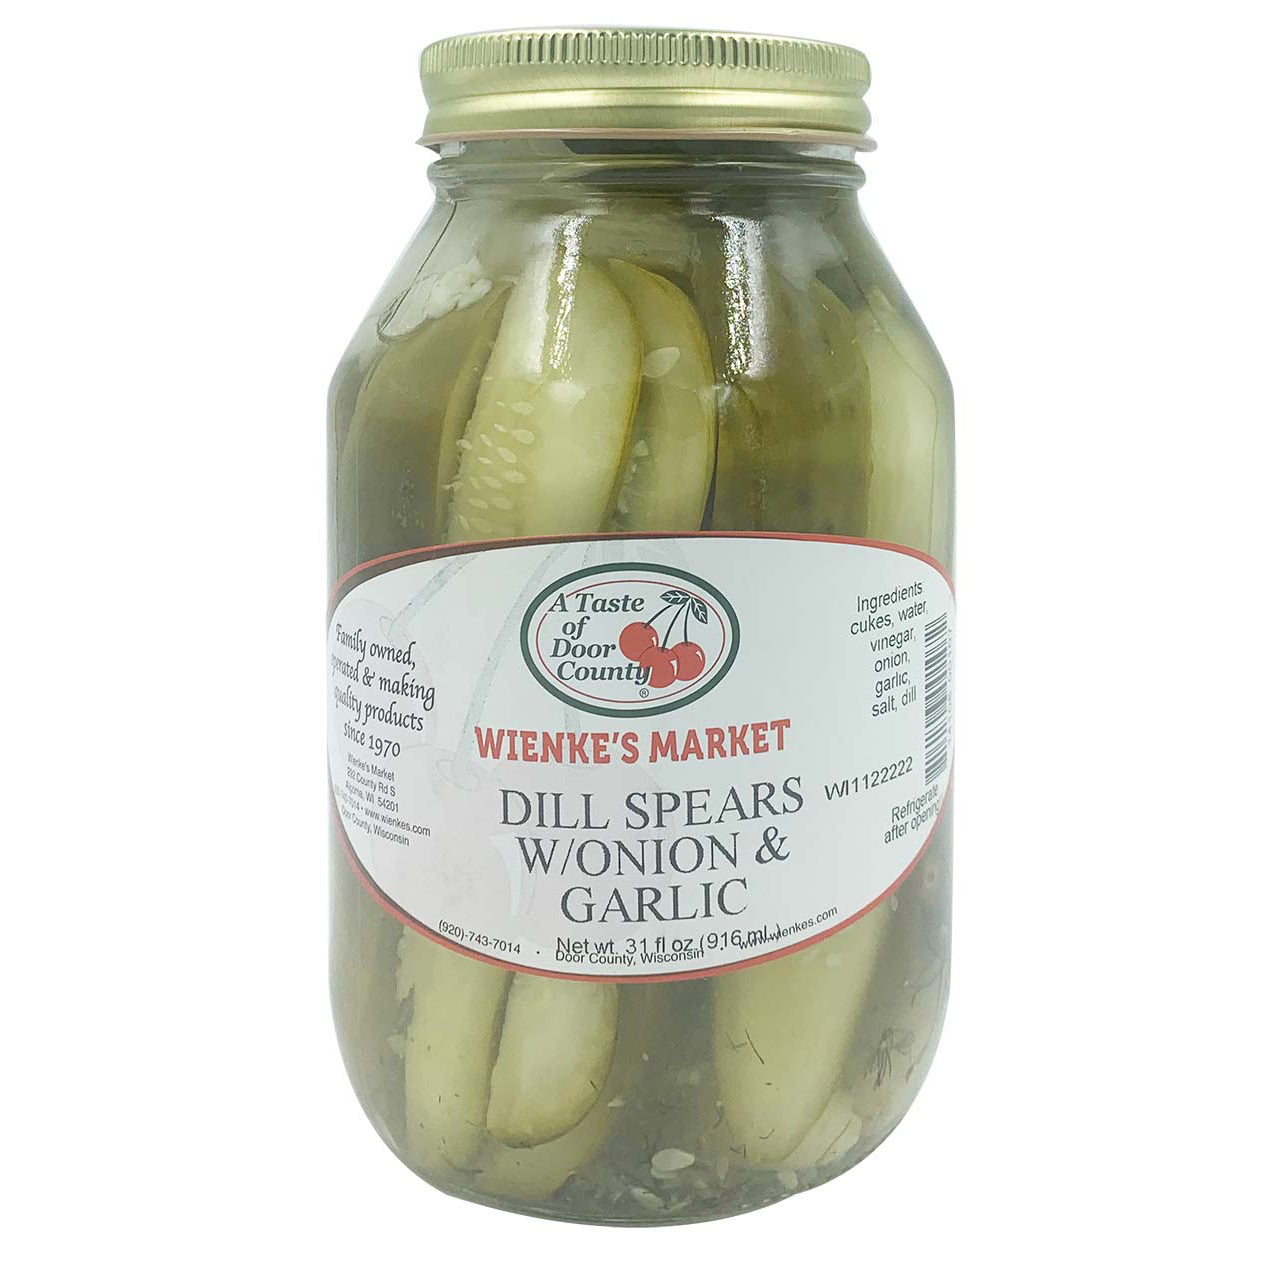 Dill Spears With Onion & Garlic